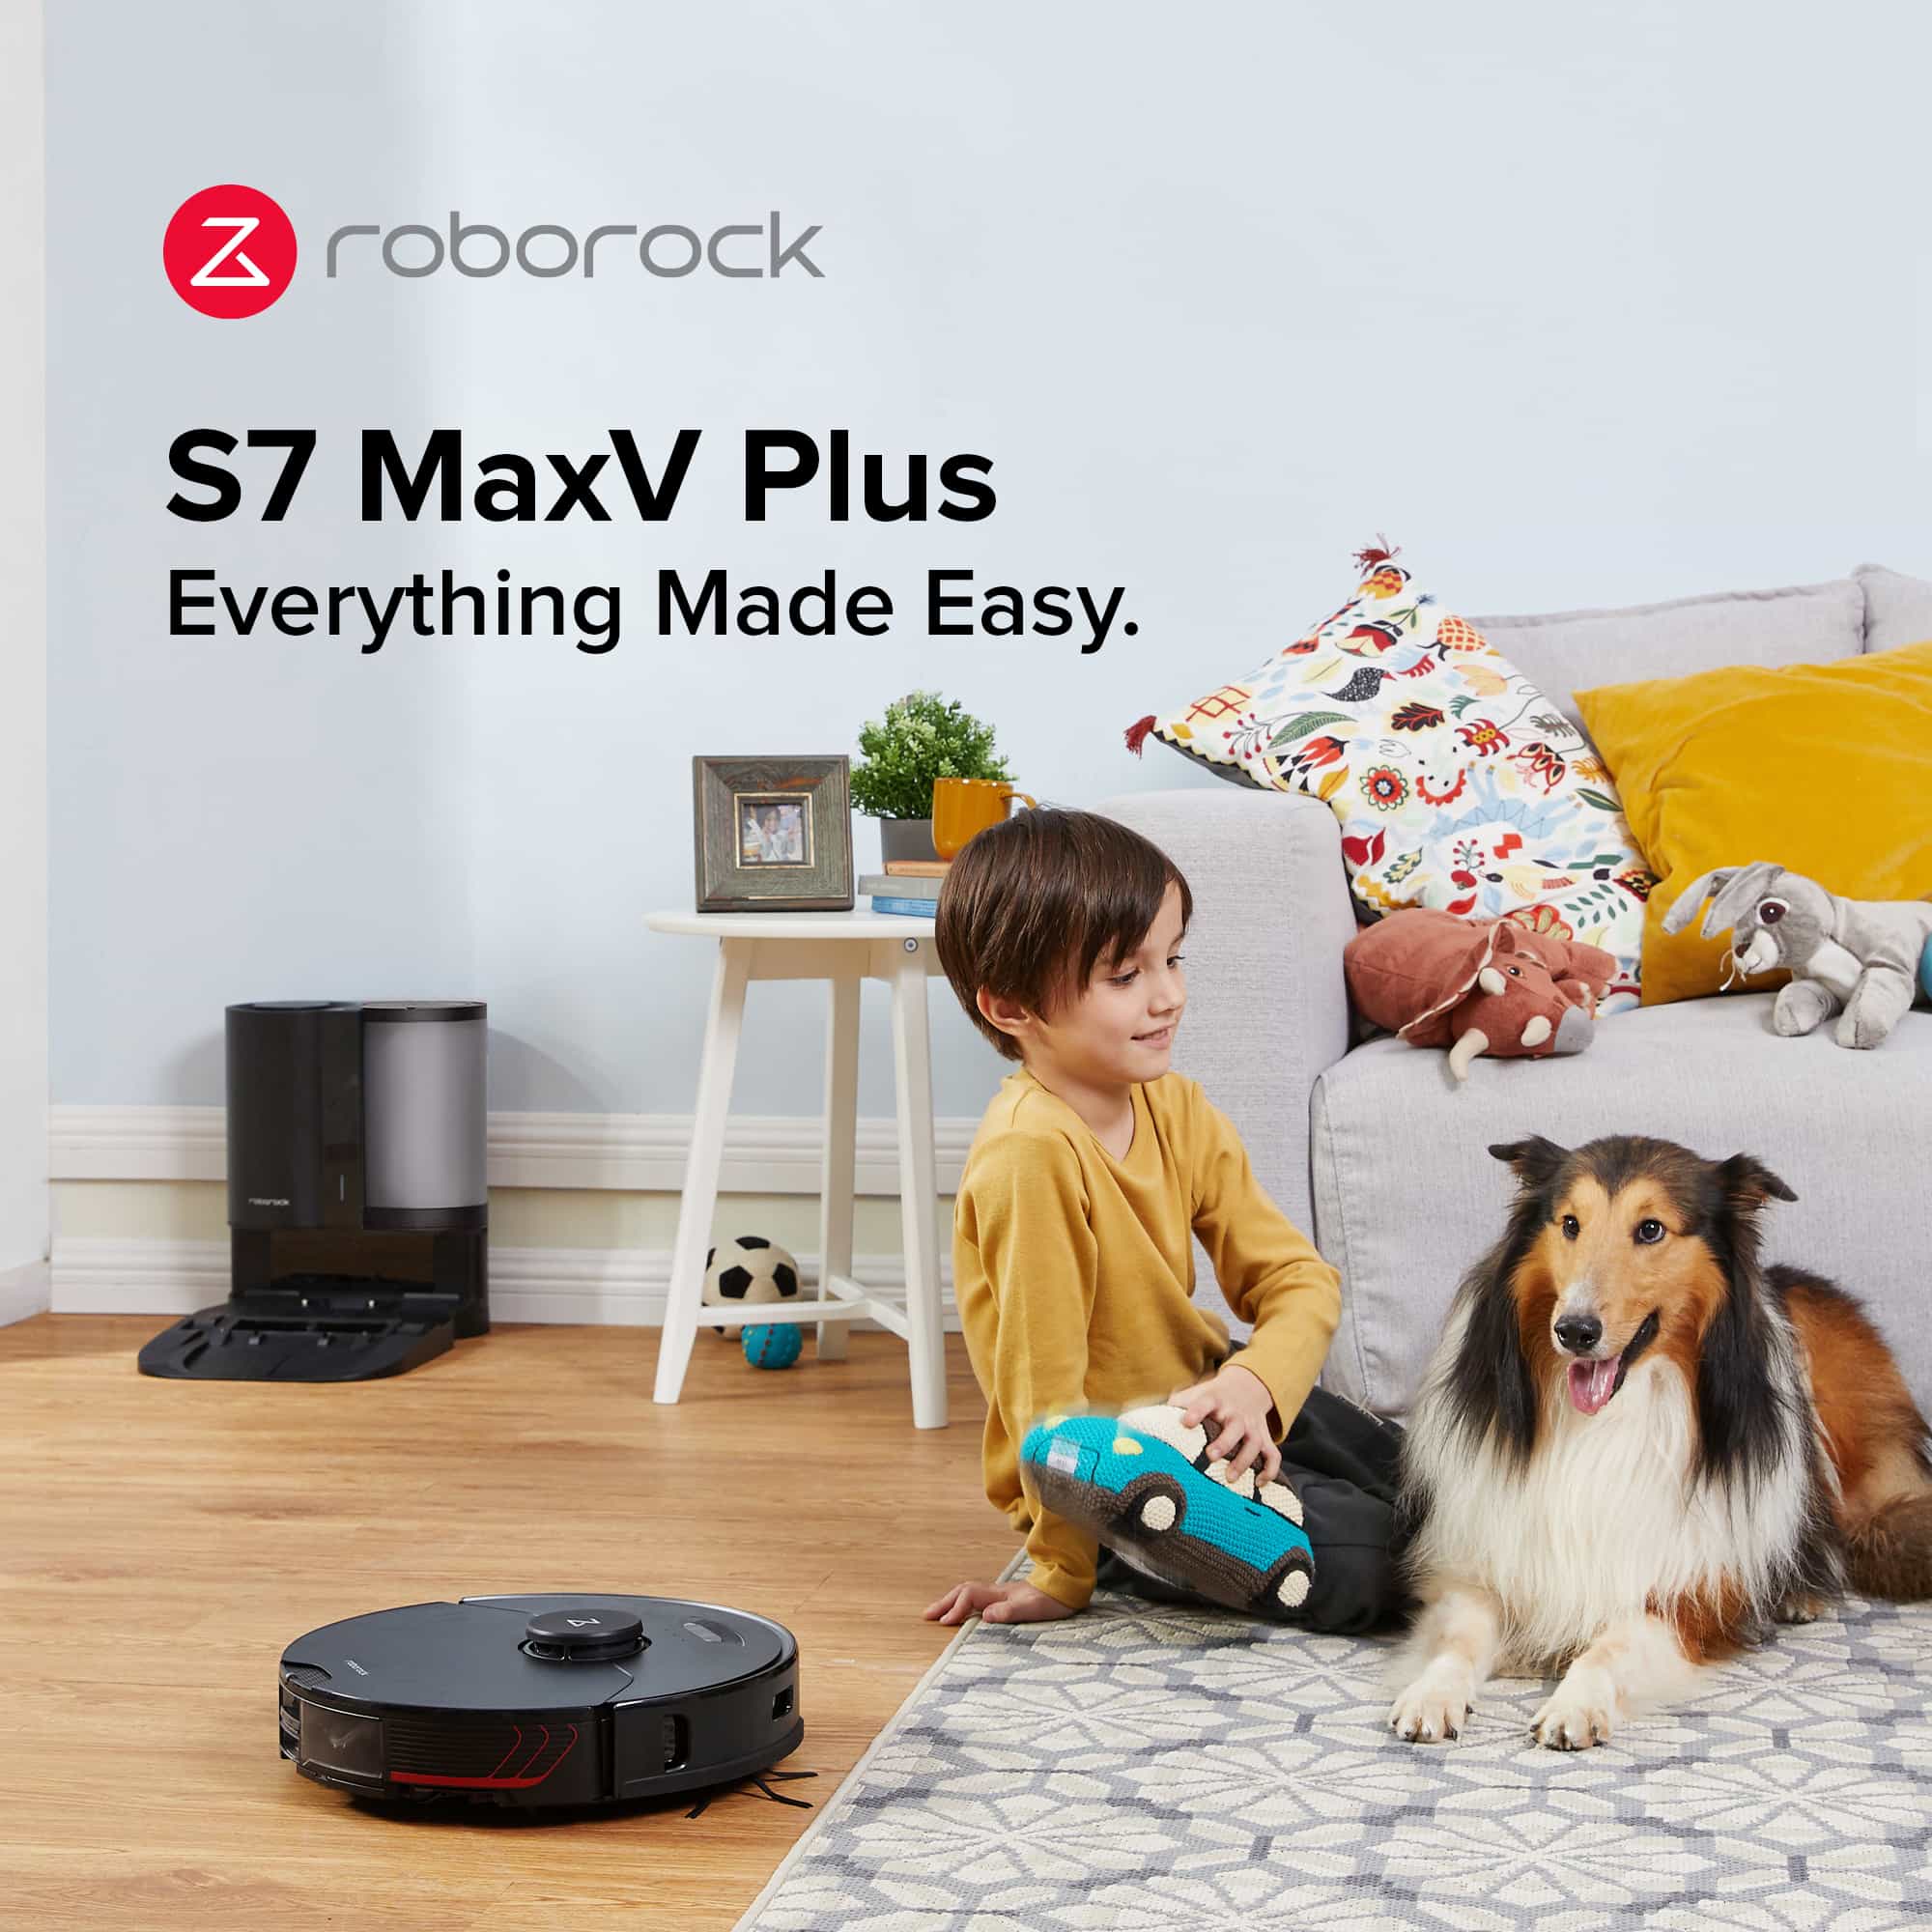 Roborock S7 MaxV Plus Robot Vacuum and Mop Cleaner with Auto-Empty